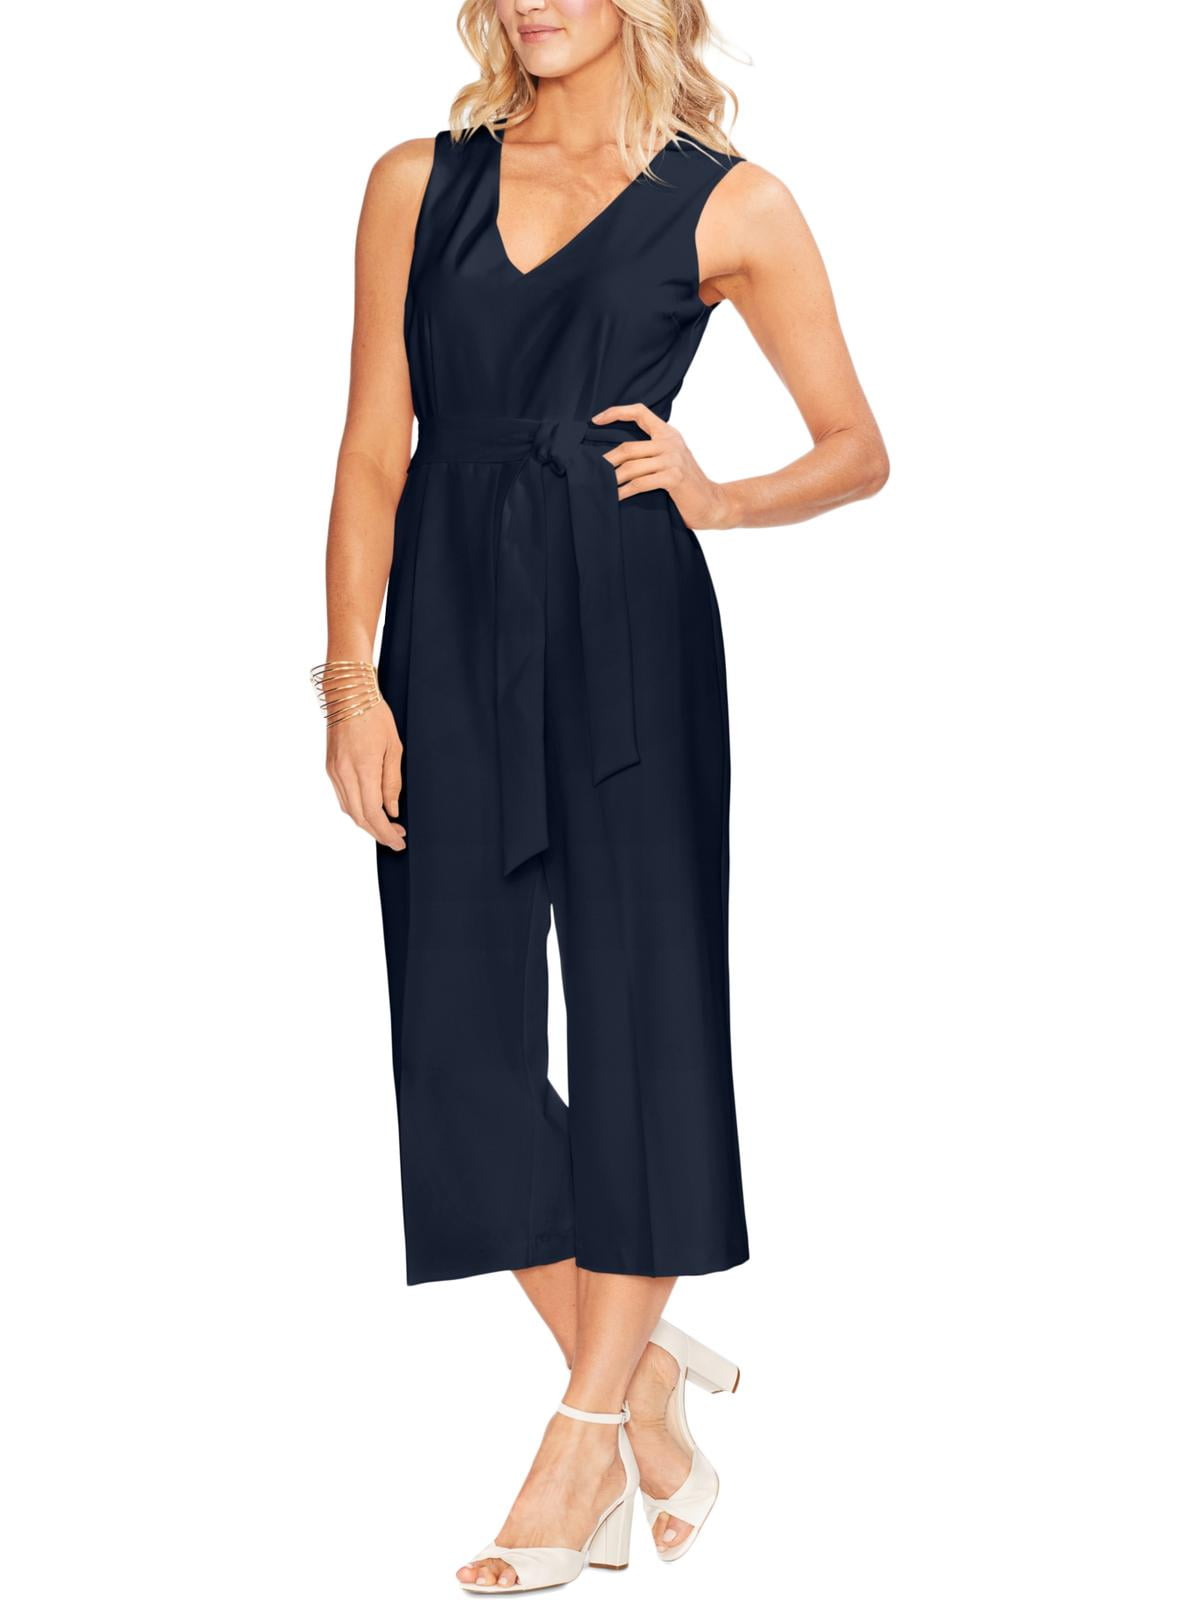 Summer Style Guide: How to Wear a Jumpsuit Casually